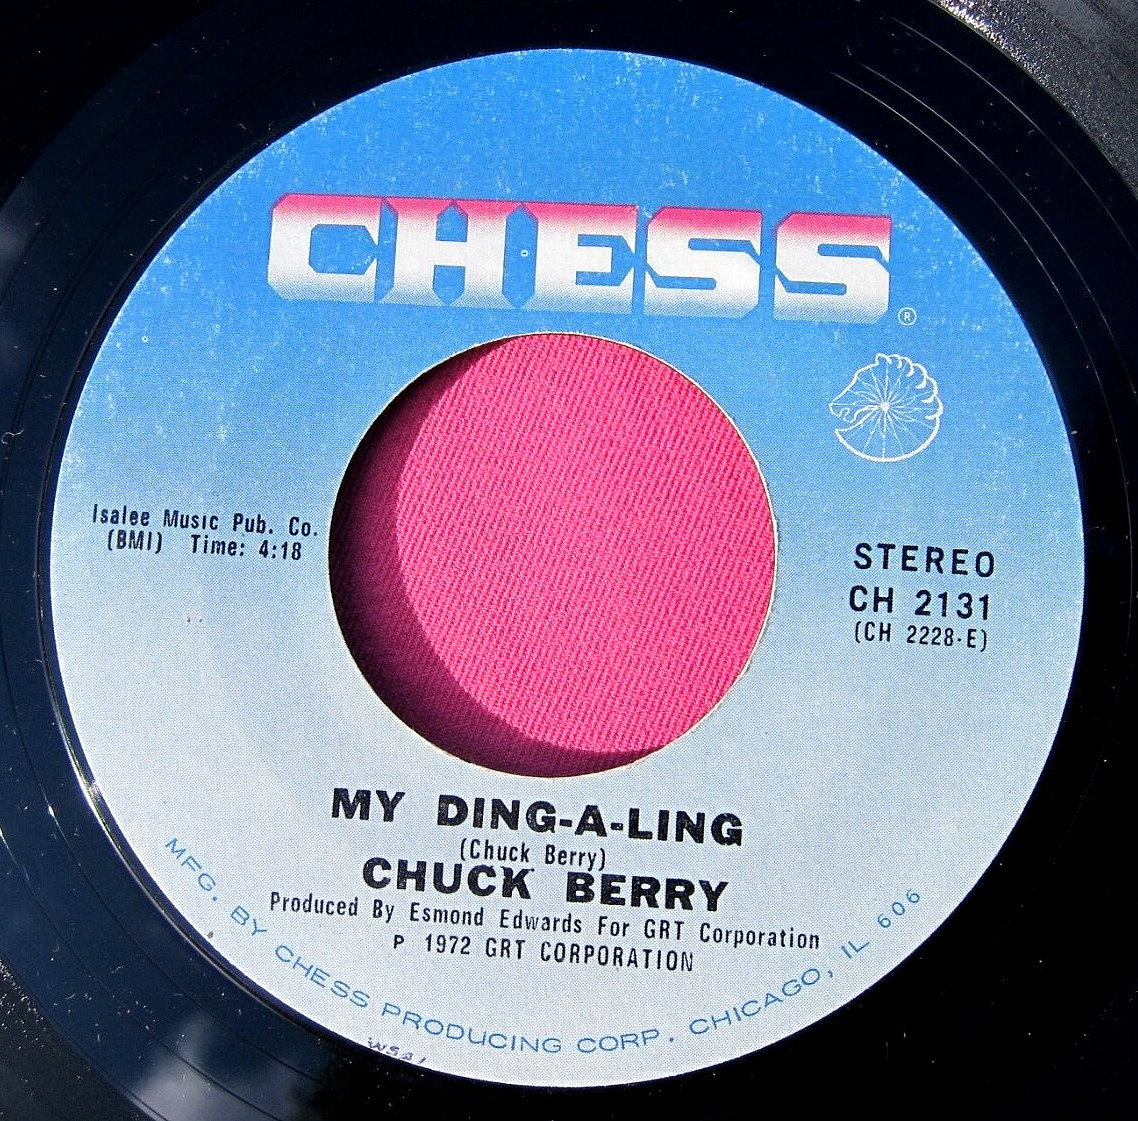 CHUCK BERRY - My Ding-a-Ling - clean 45 rpm - Chess 2131 - 1st press blue label